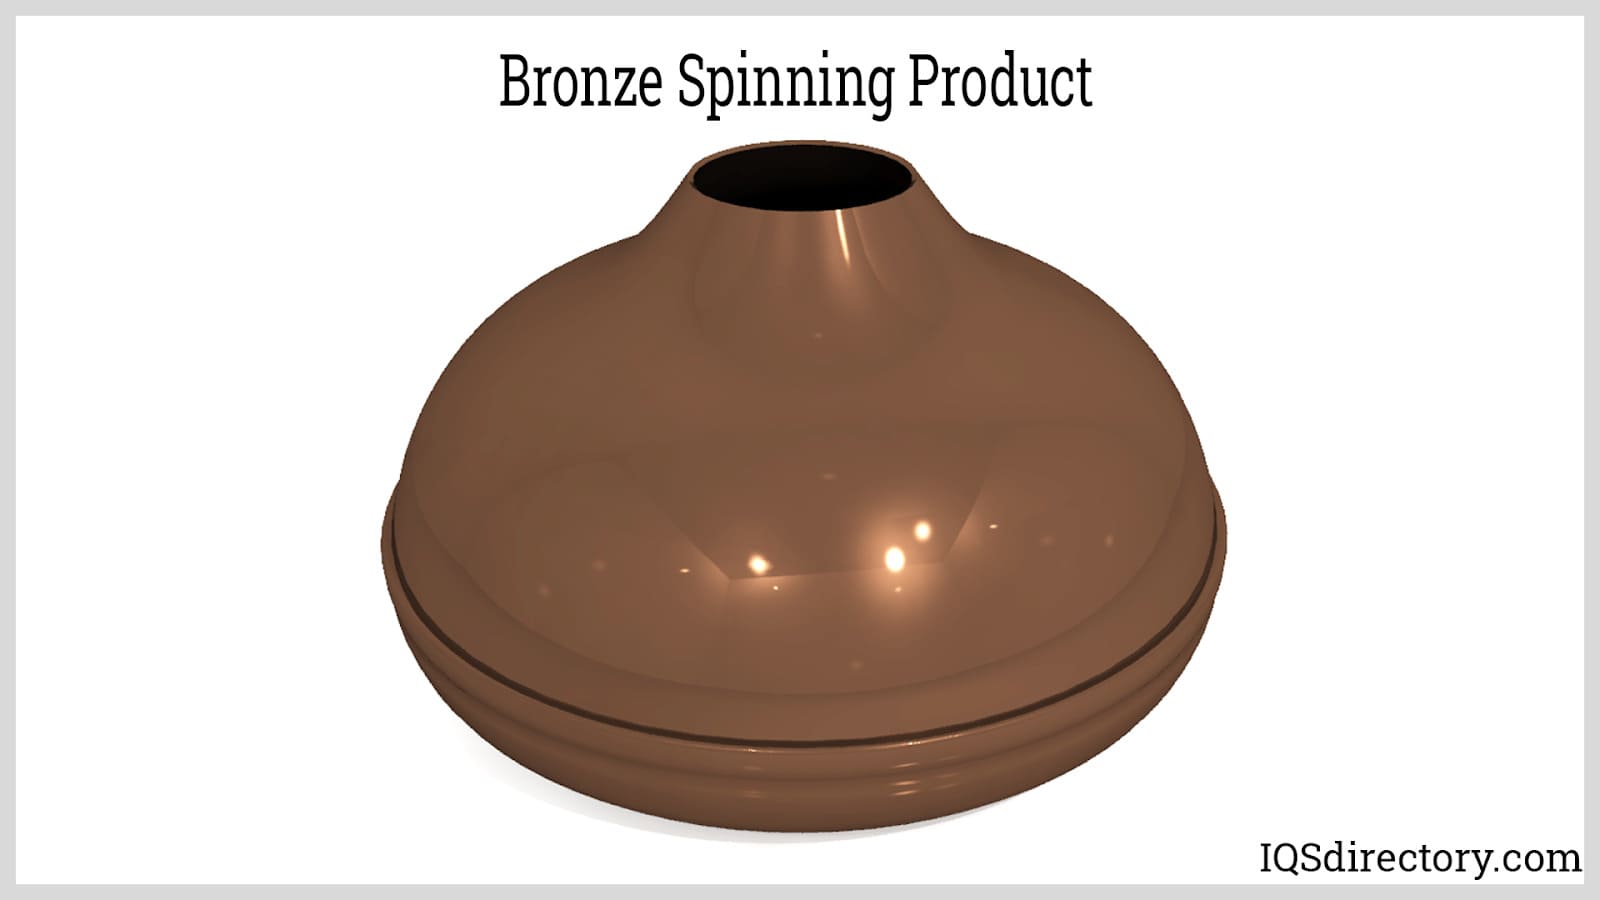 Bronze Spinning Product